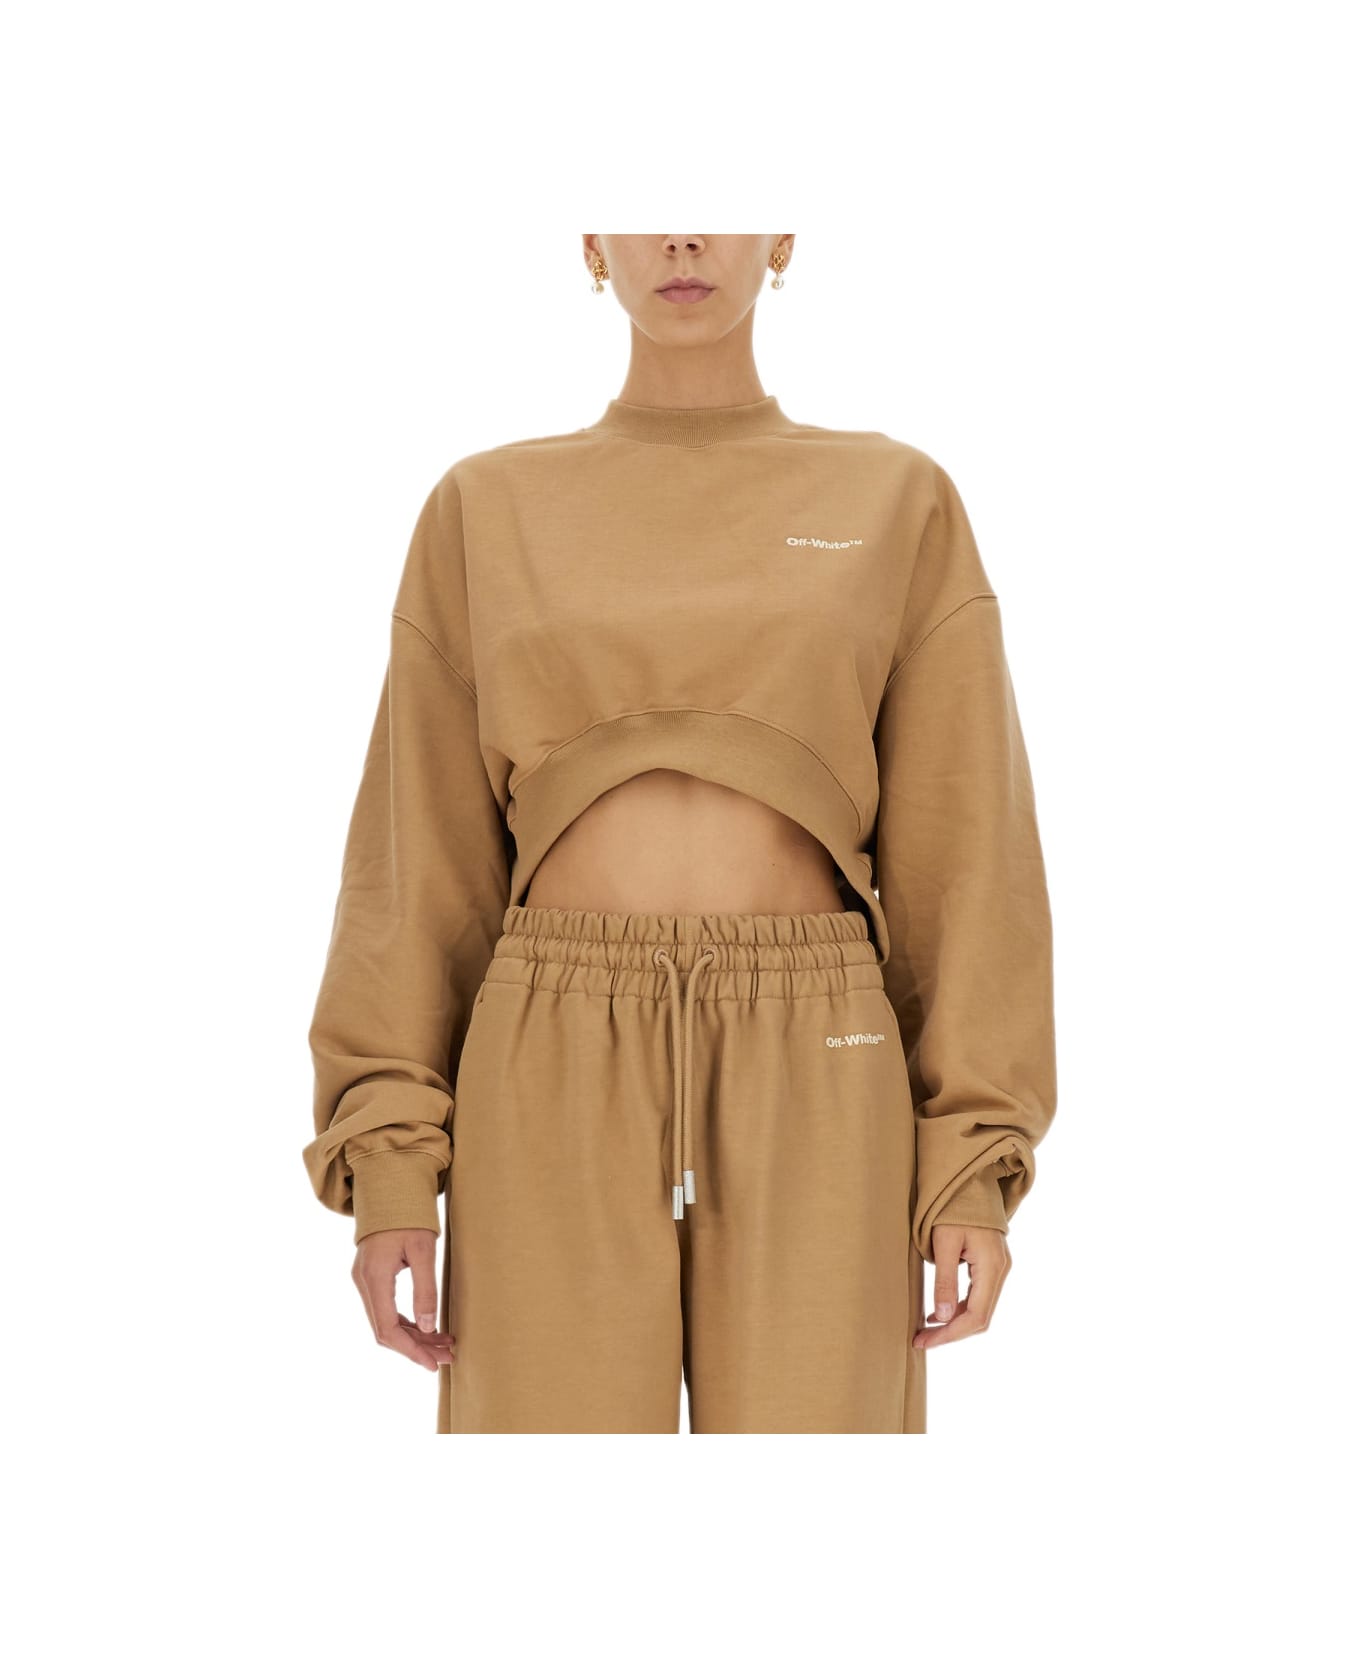 Off-White Cropped Sweatshirt With Logo - BROWN